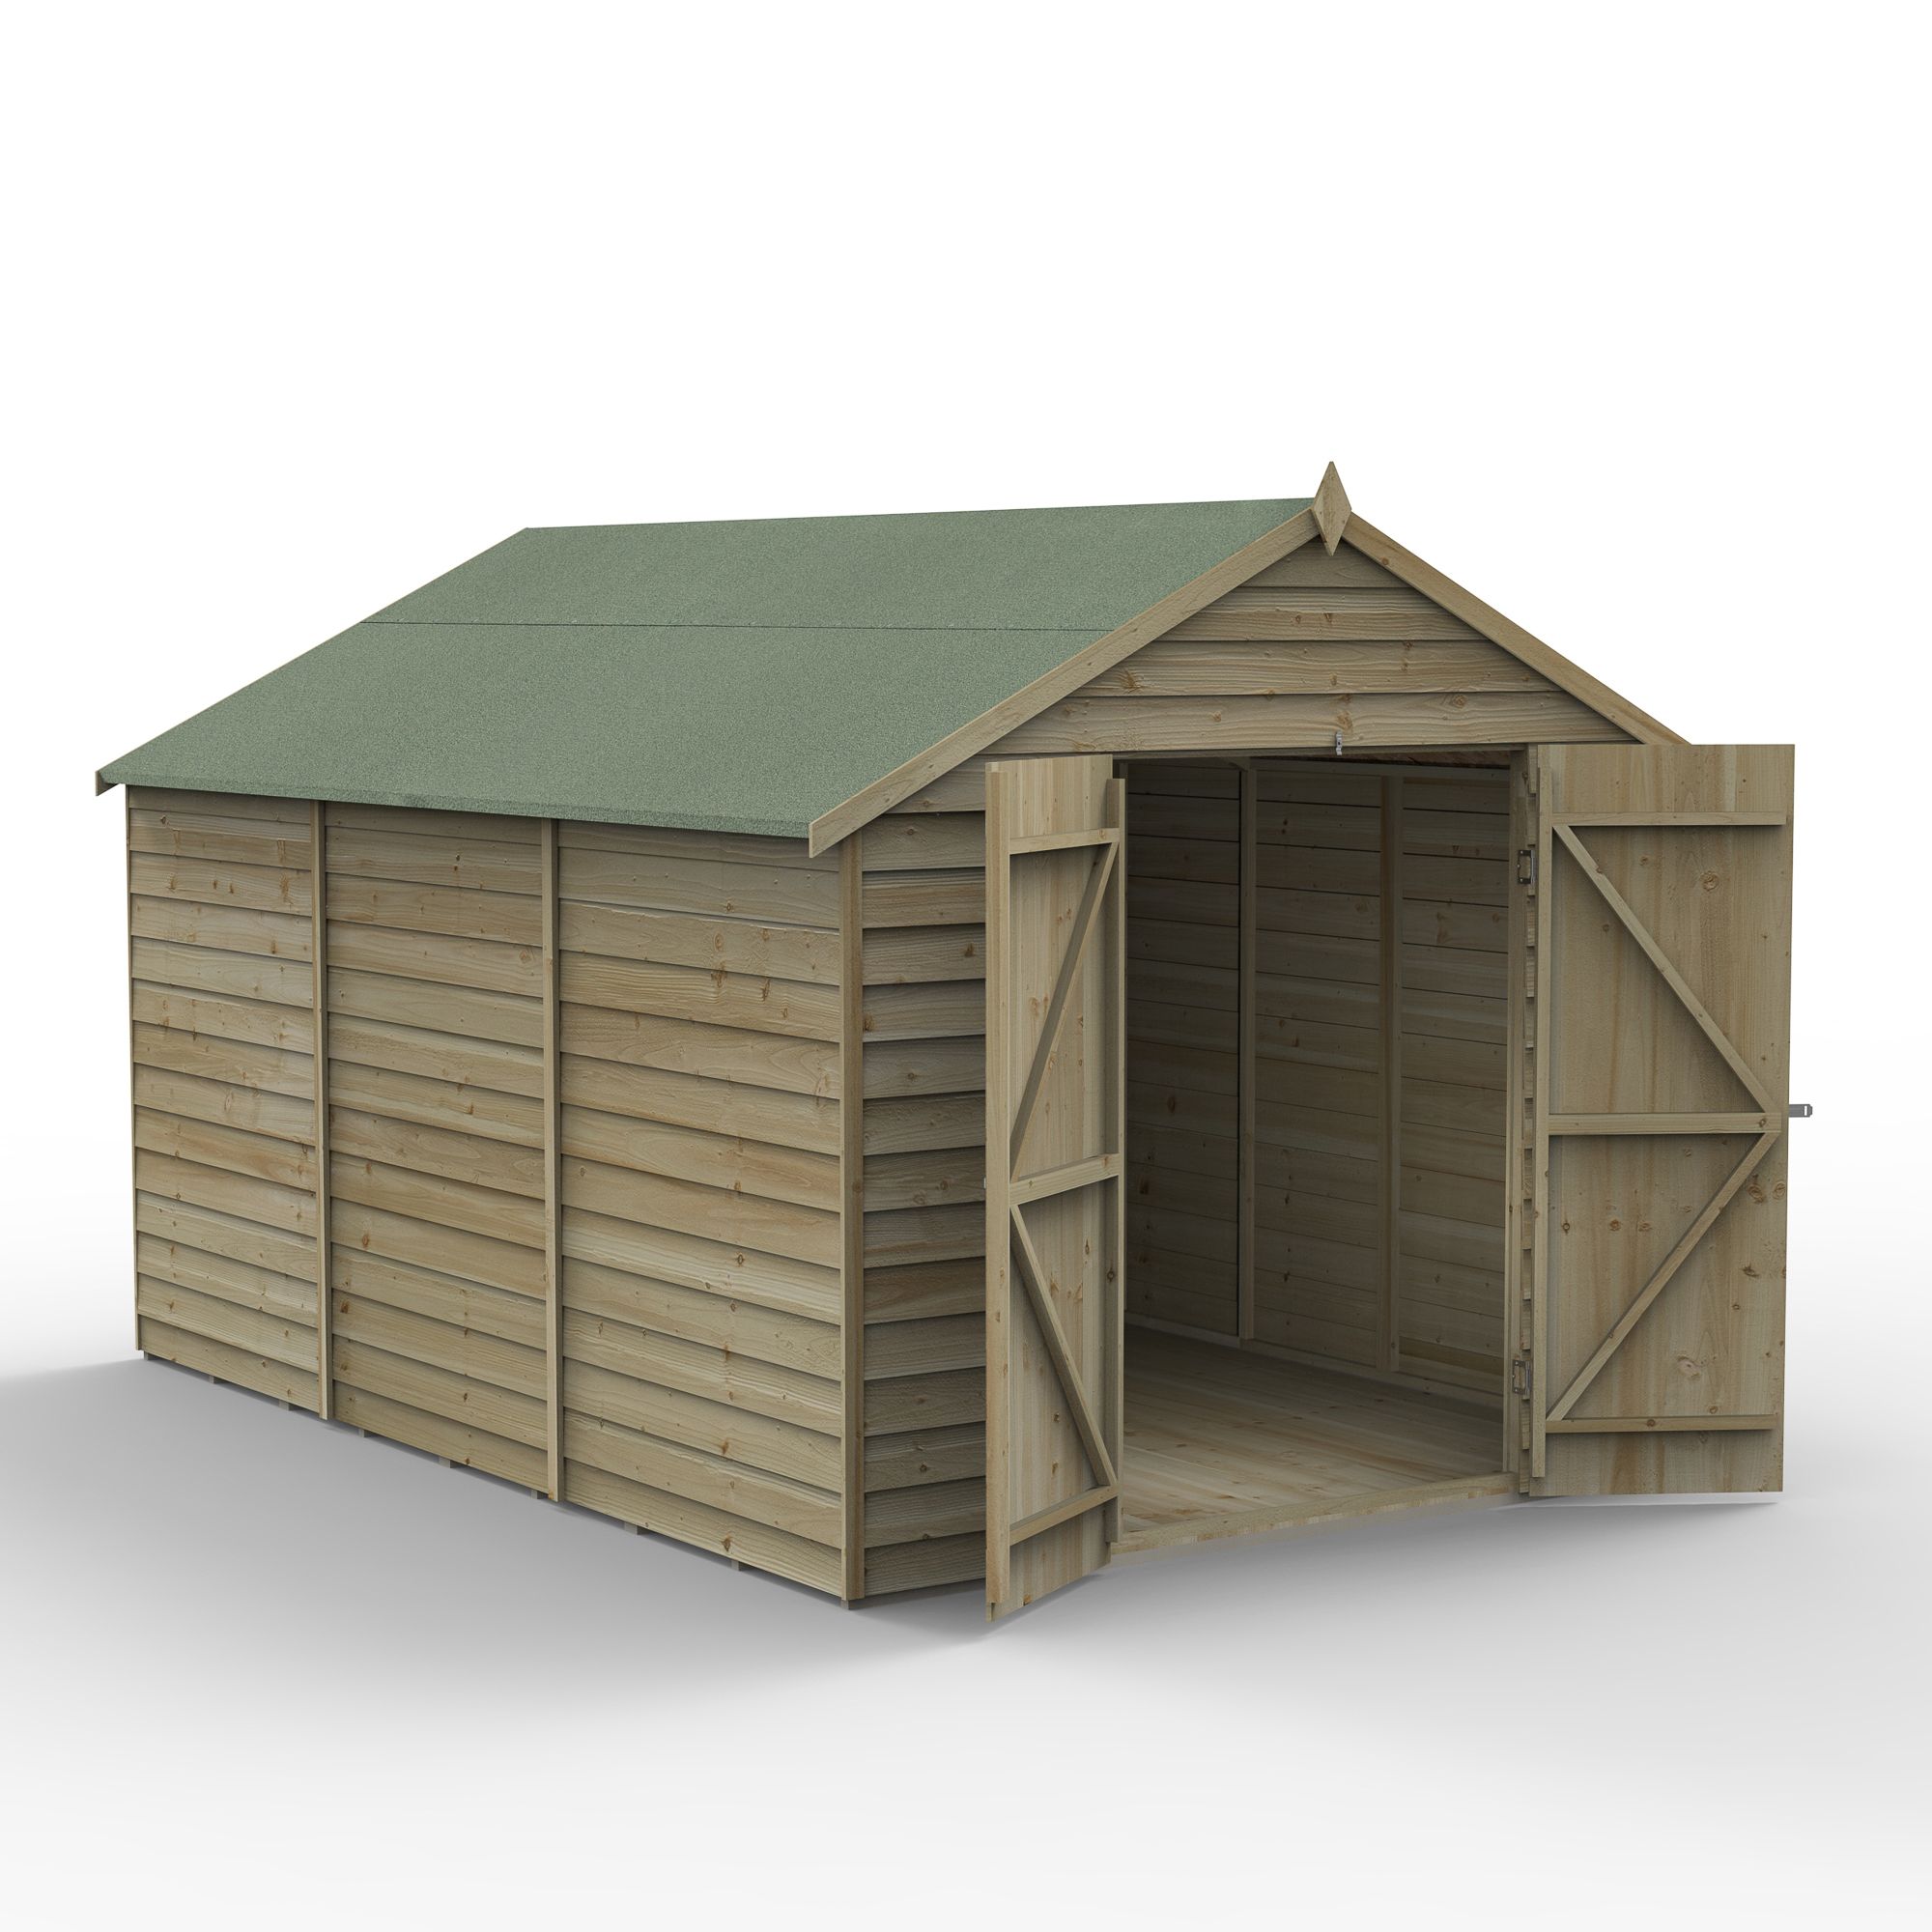 Forest Garden Overlap 12x8 ft Apex Wooden 2 door Shed with floor - Assembly service included